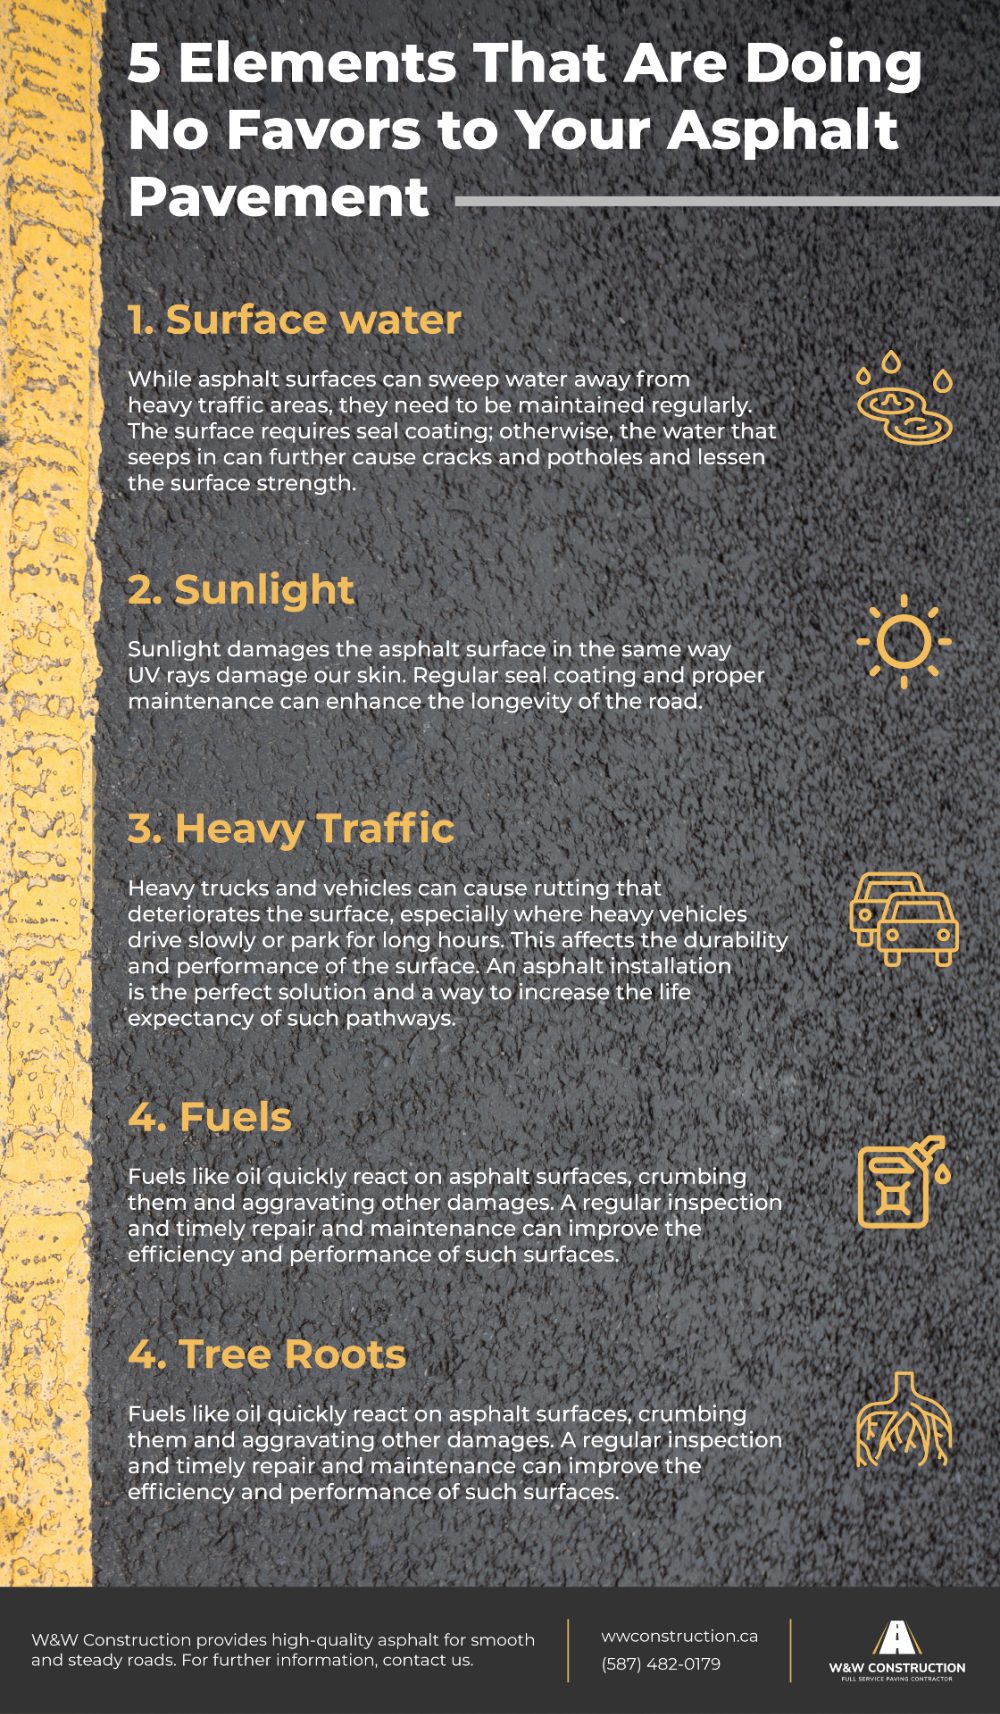 Elements That Are Doing No Favors to Your Asphalt Pavement